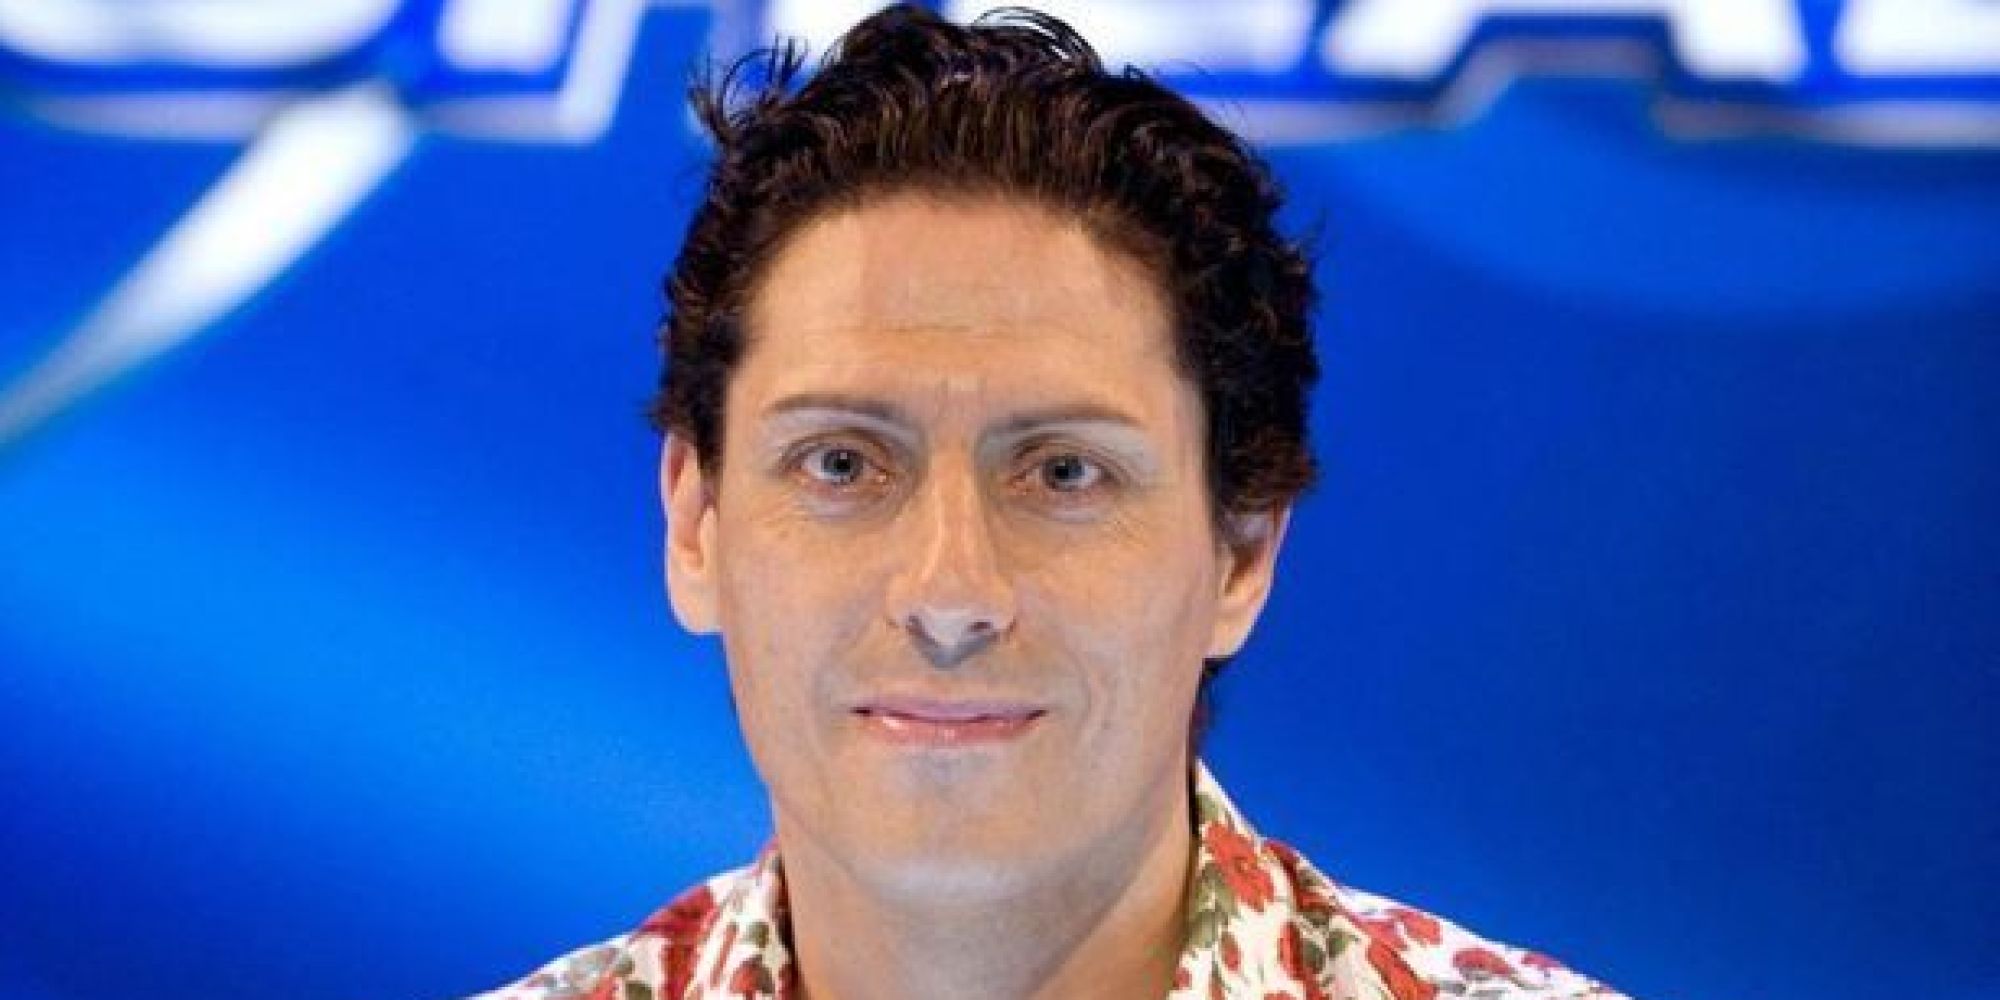 Former Eggheads star CJ de Mooi has revealed he's dying of AIDS. (Credit: BBC)